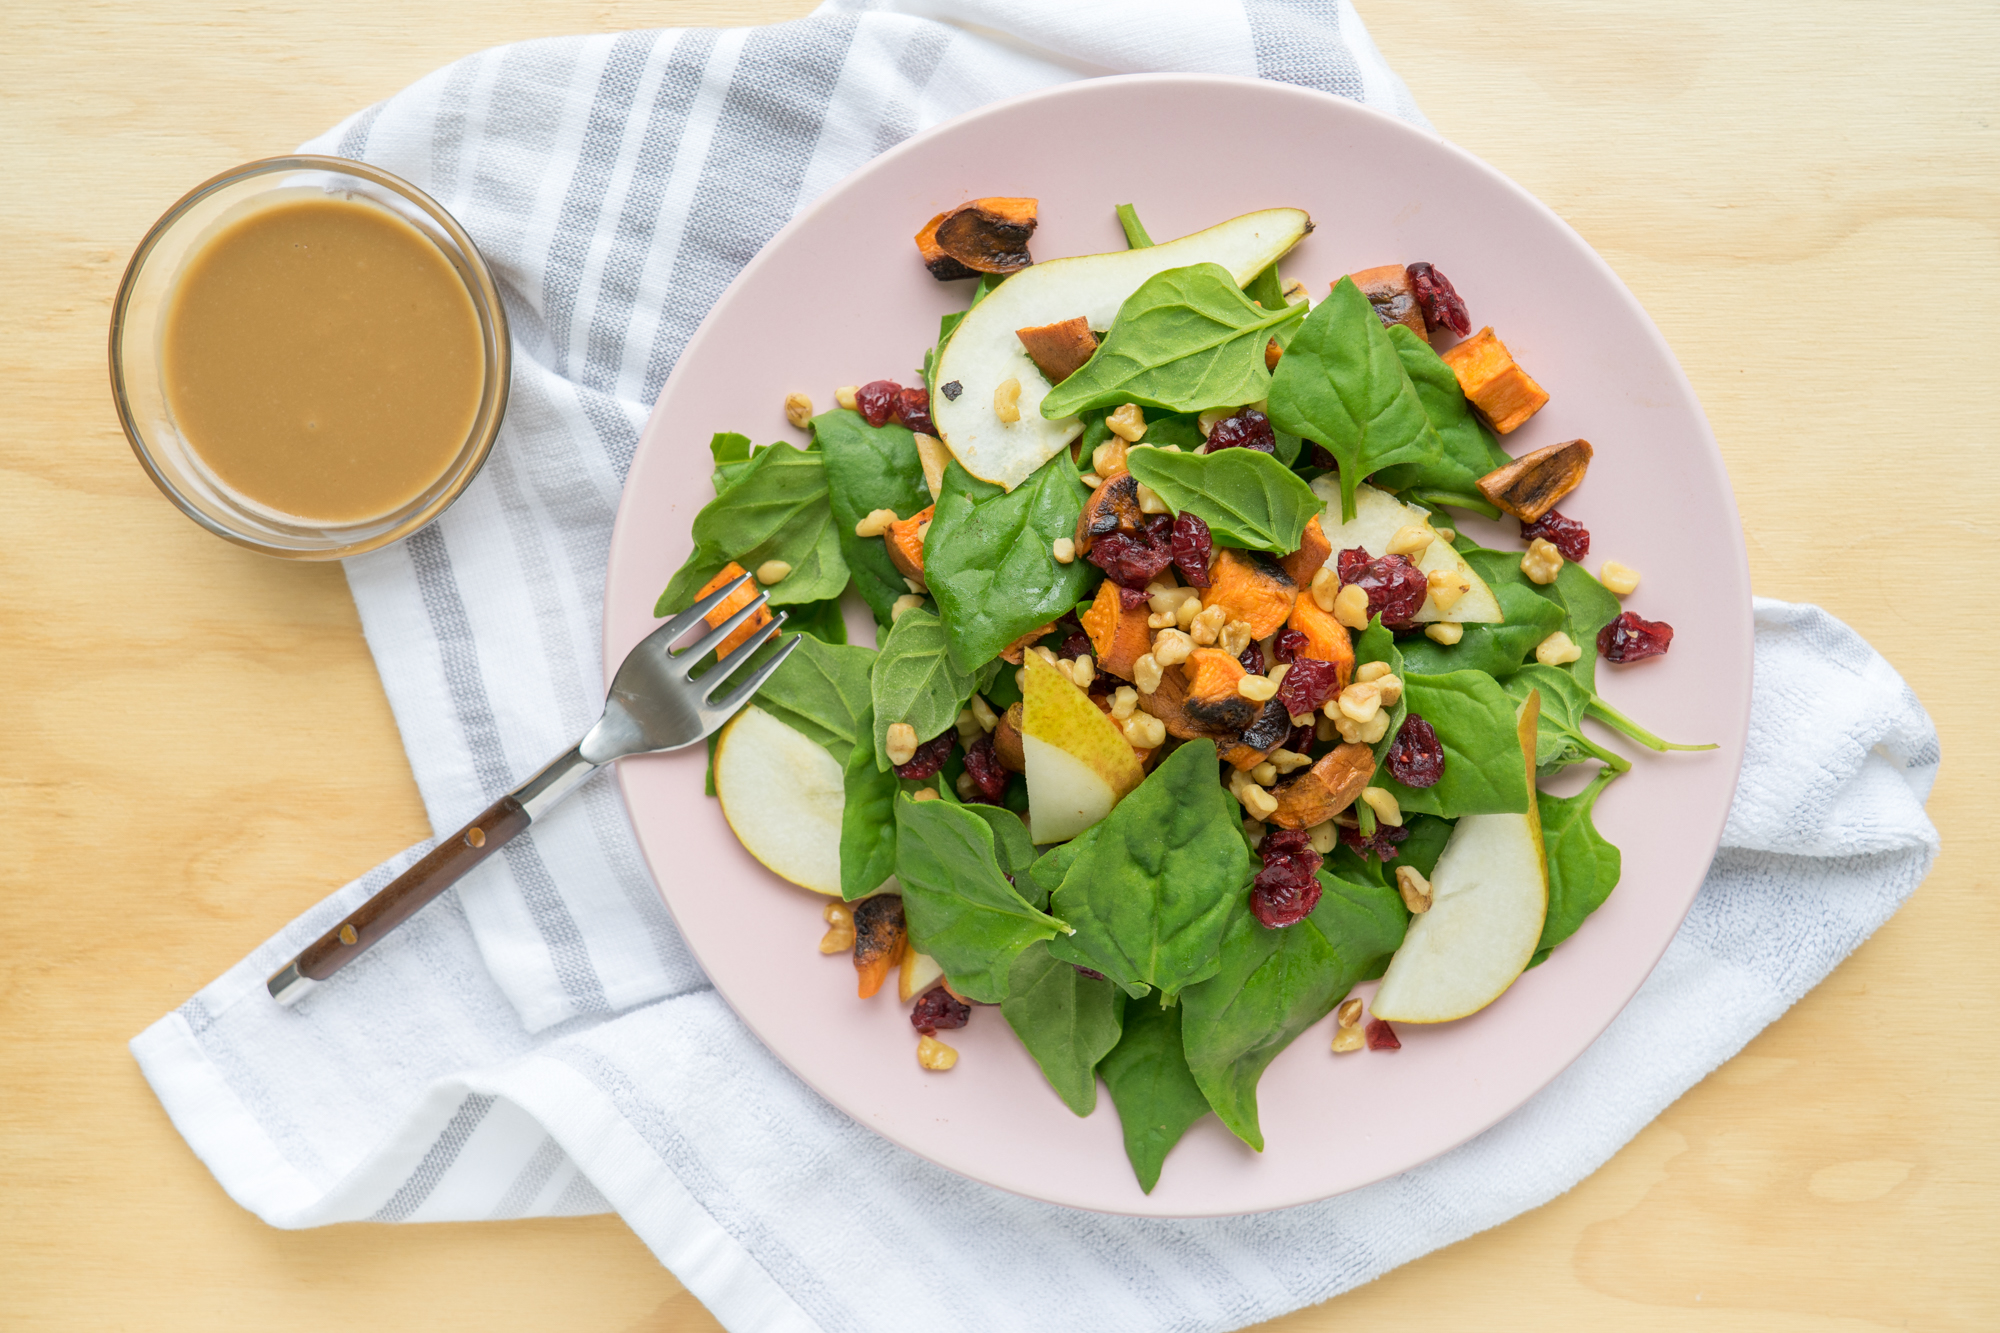 Ends+Stems Recipe: Sweet Potato, Pear, Spinach + Cranberry Salad with Walnuts